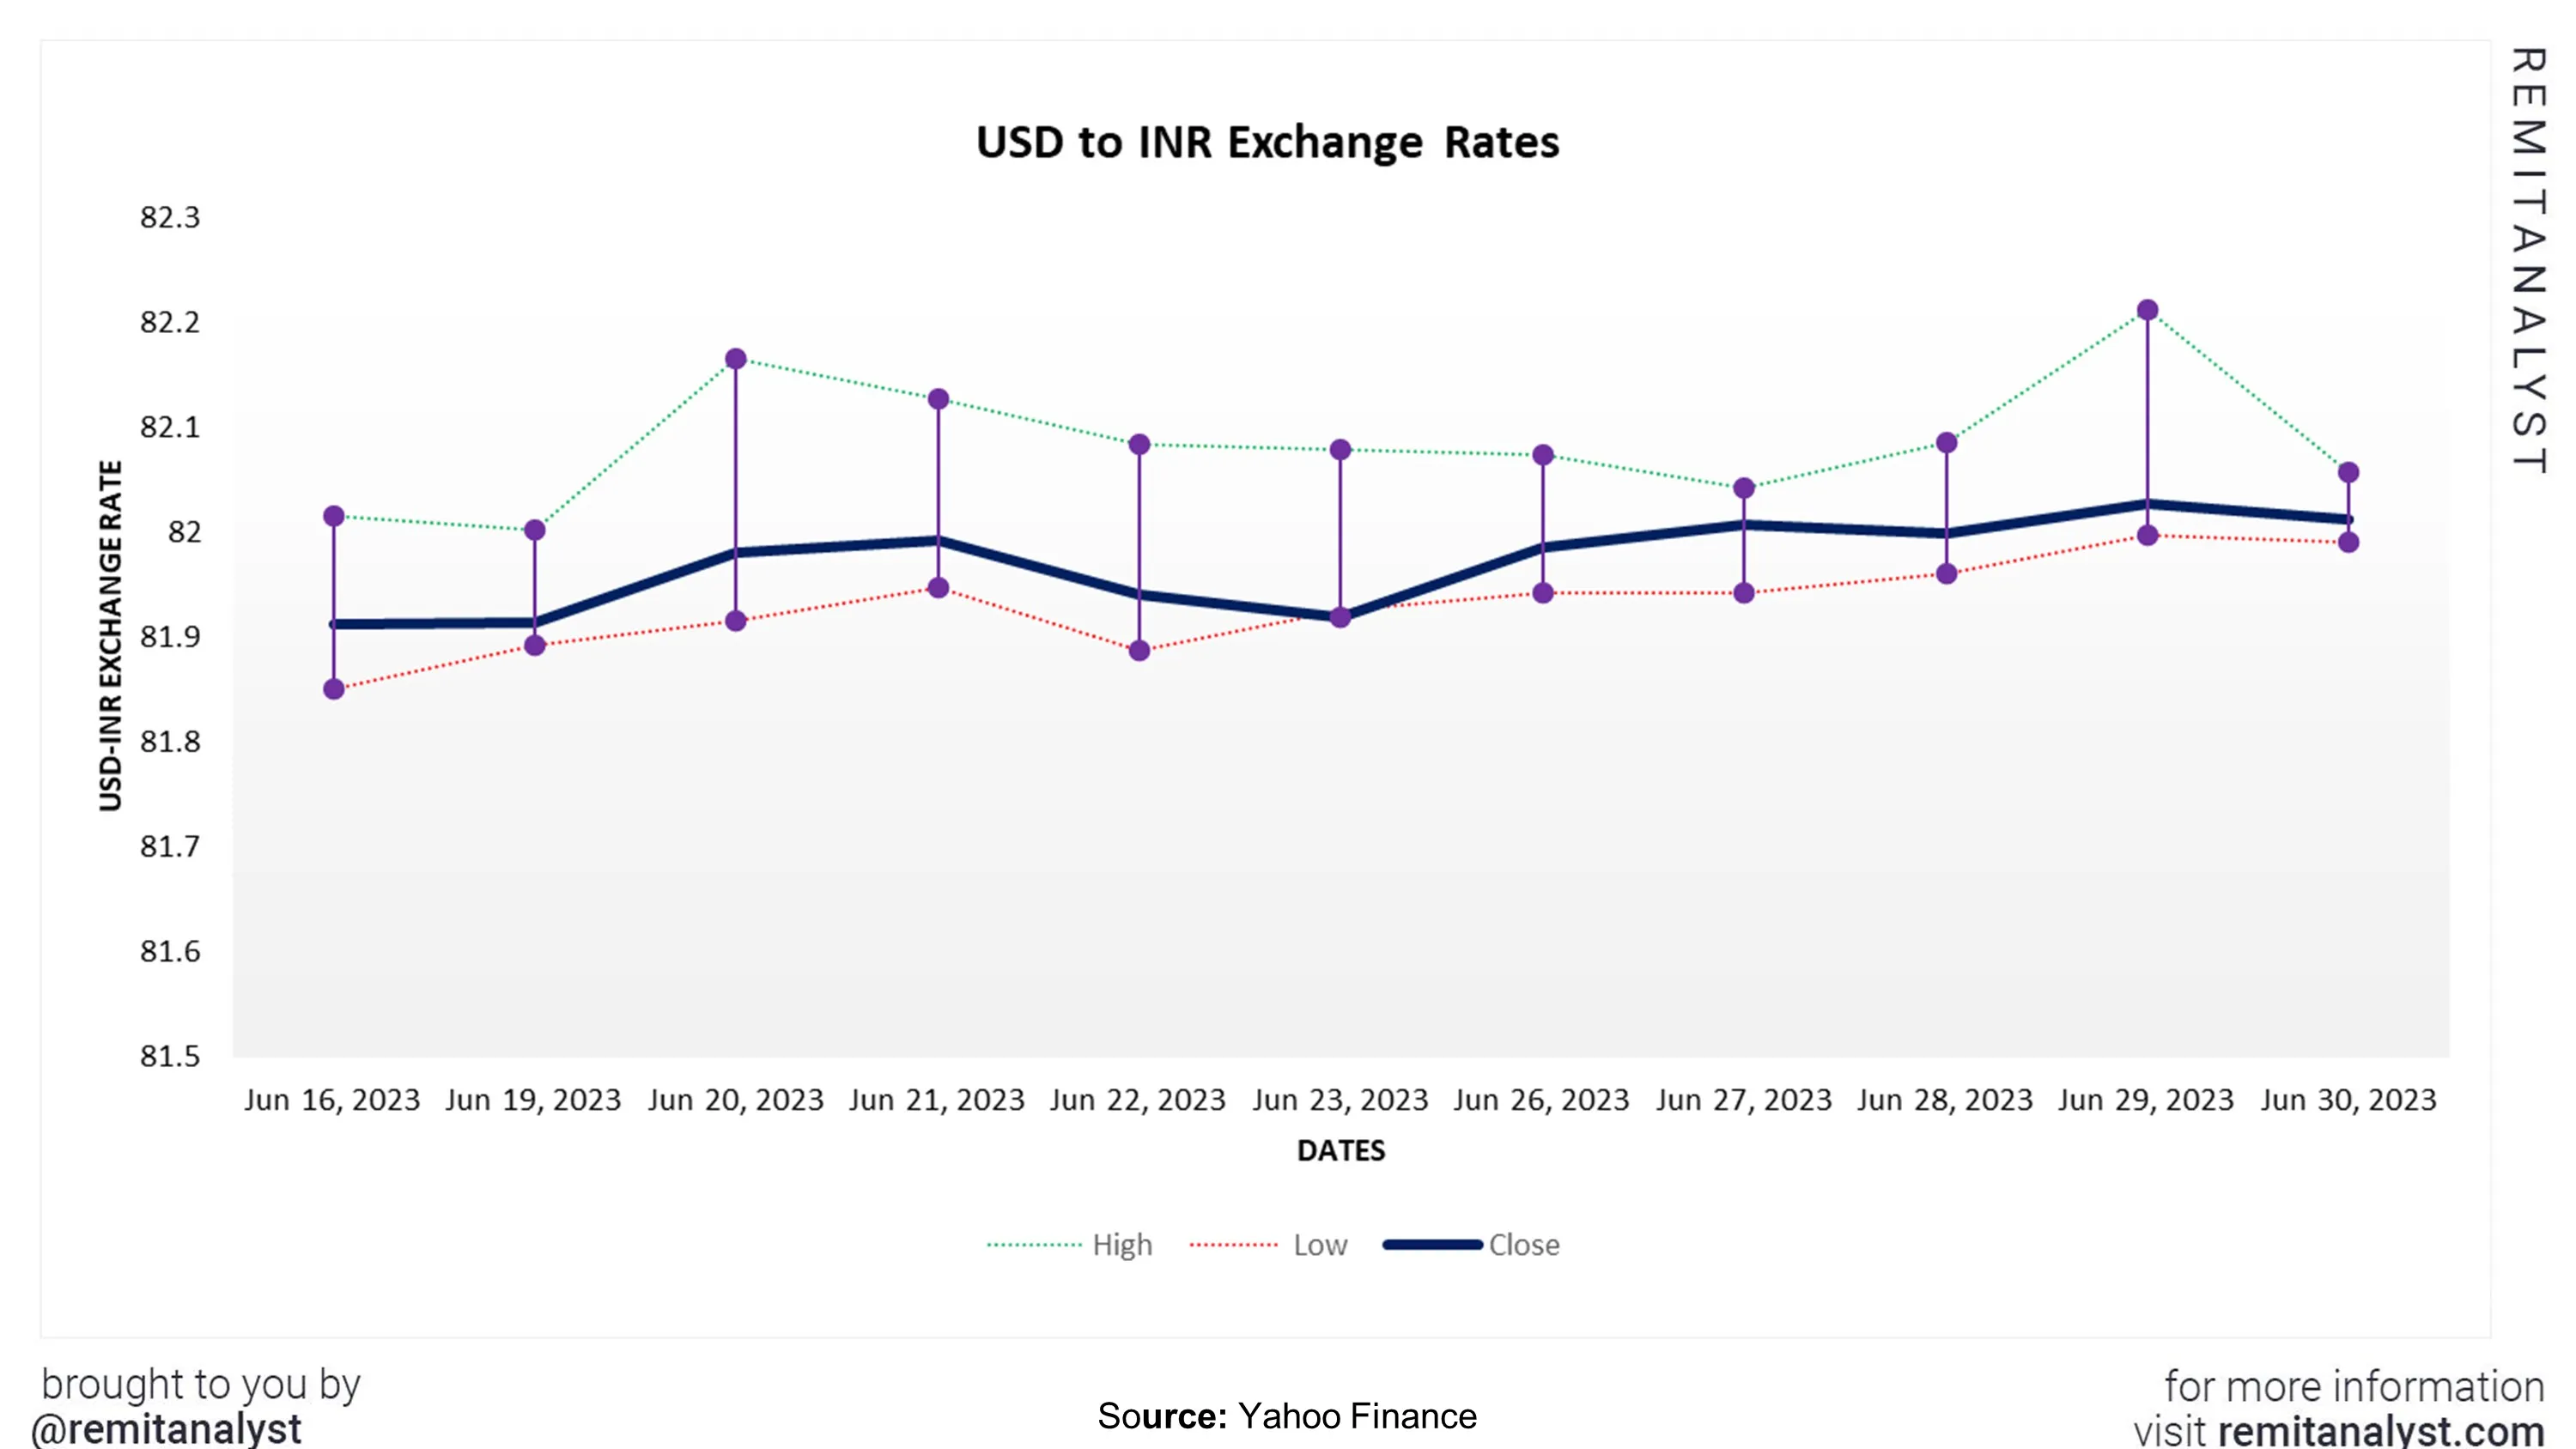 usd-to-inr-exchange-rate-from-16-june-2023-to-30-june-2023